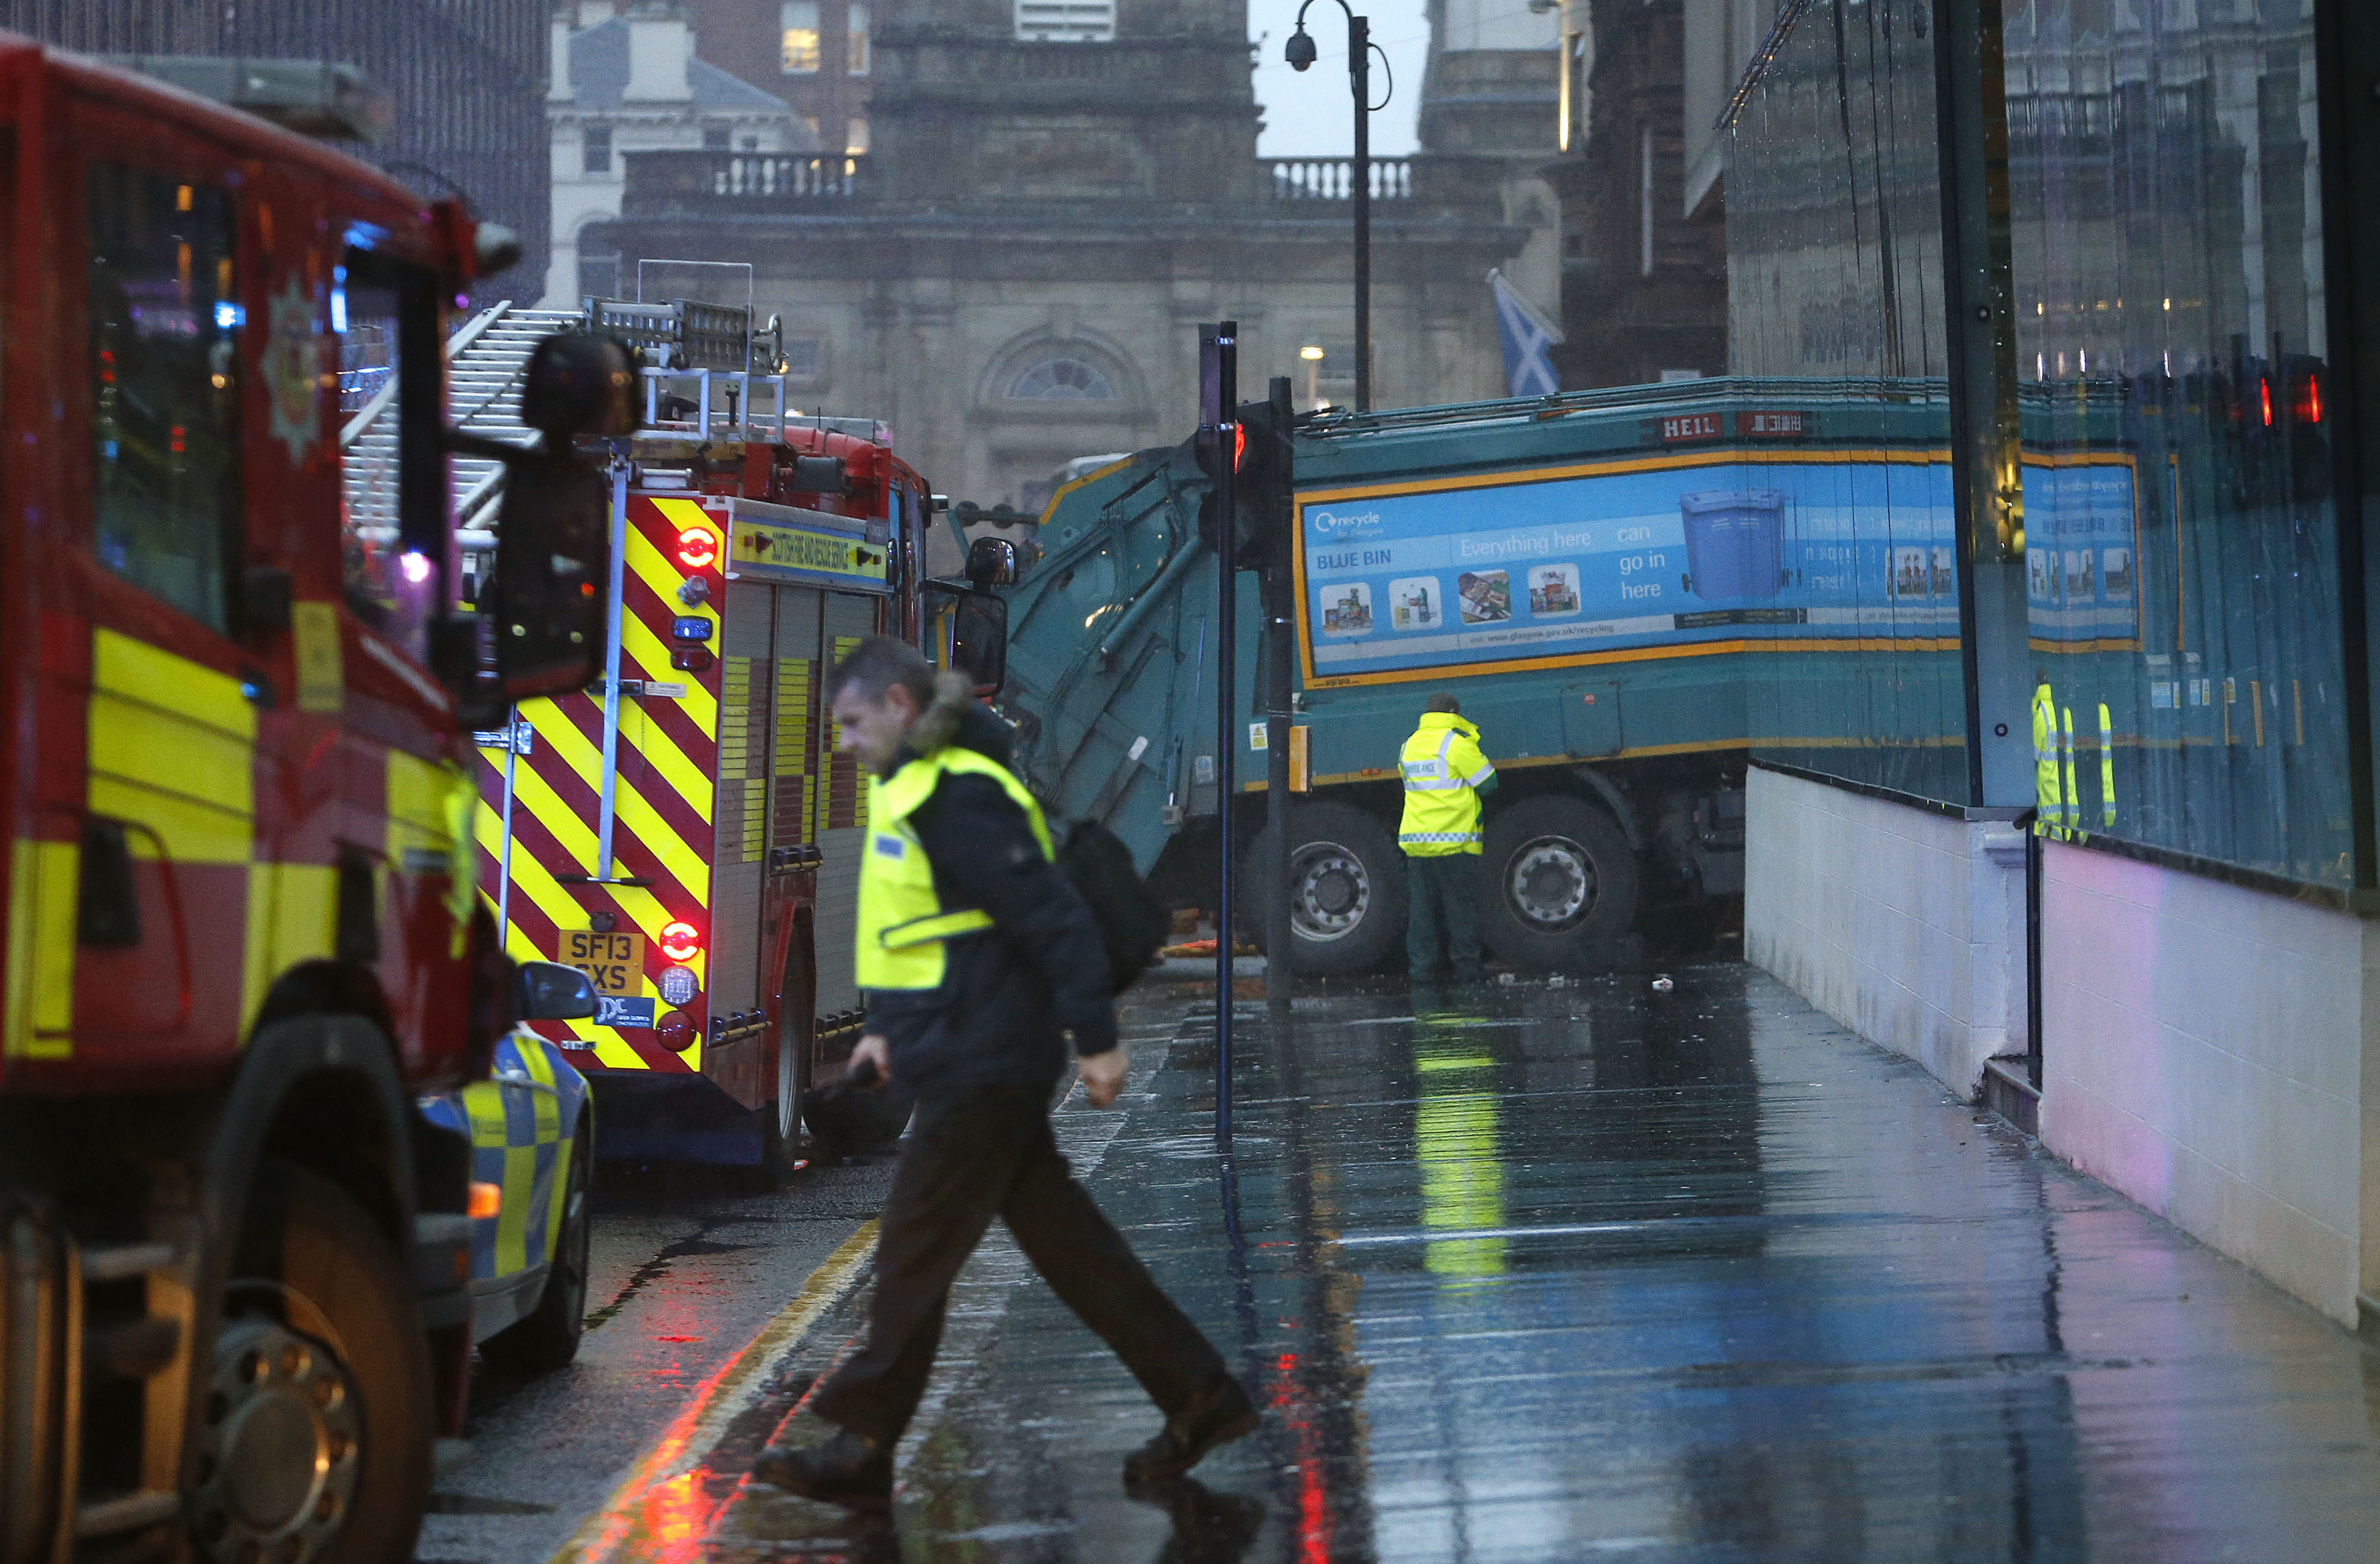 The scene in Glasgow's George Square after it is understood a bin lorry crashed into a group of pedestrians on Dec. 22, 2014. (Danny Lawson—PA)